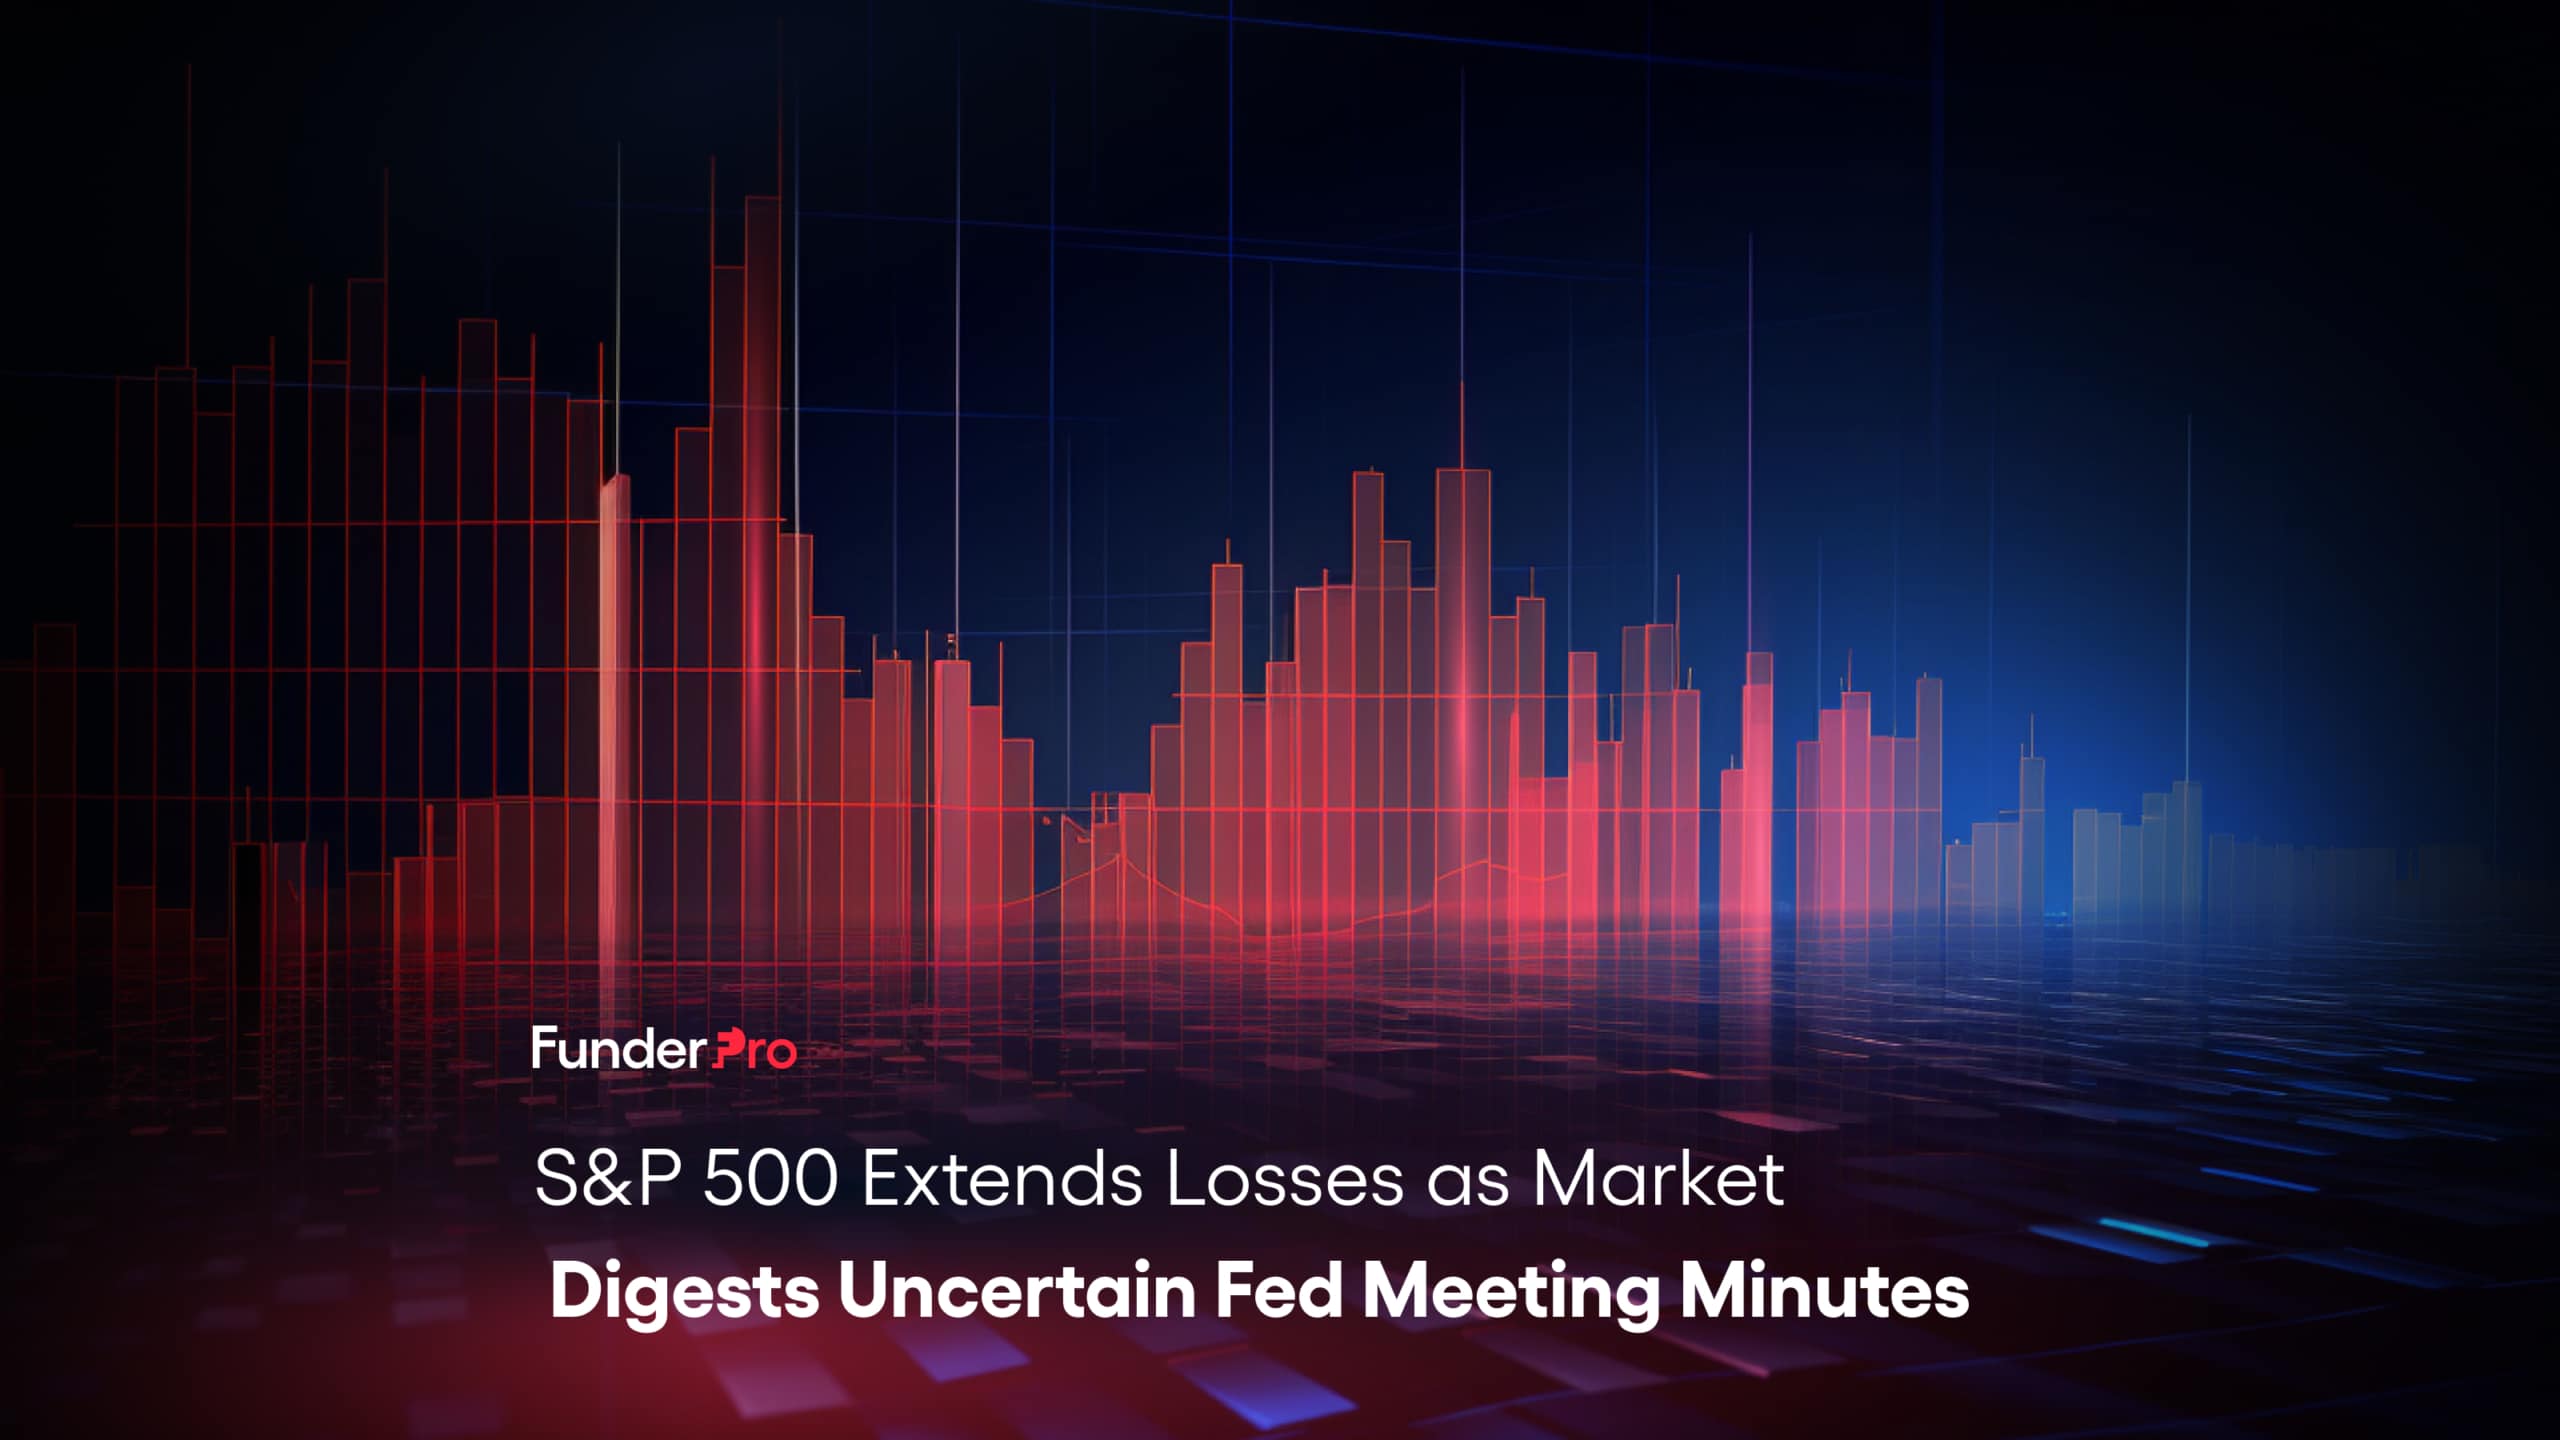 S&P 500 Extends Losses as Market Digests Uncertain Fed Meeting Minutes